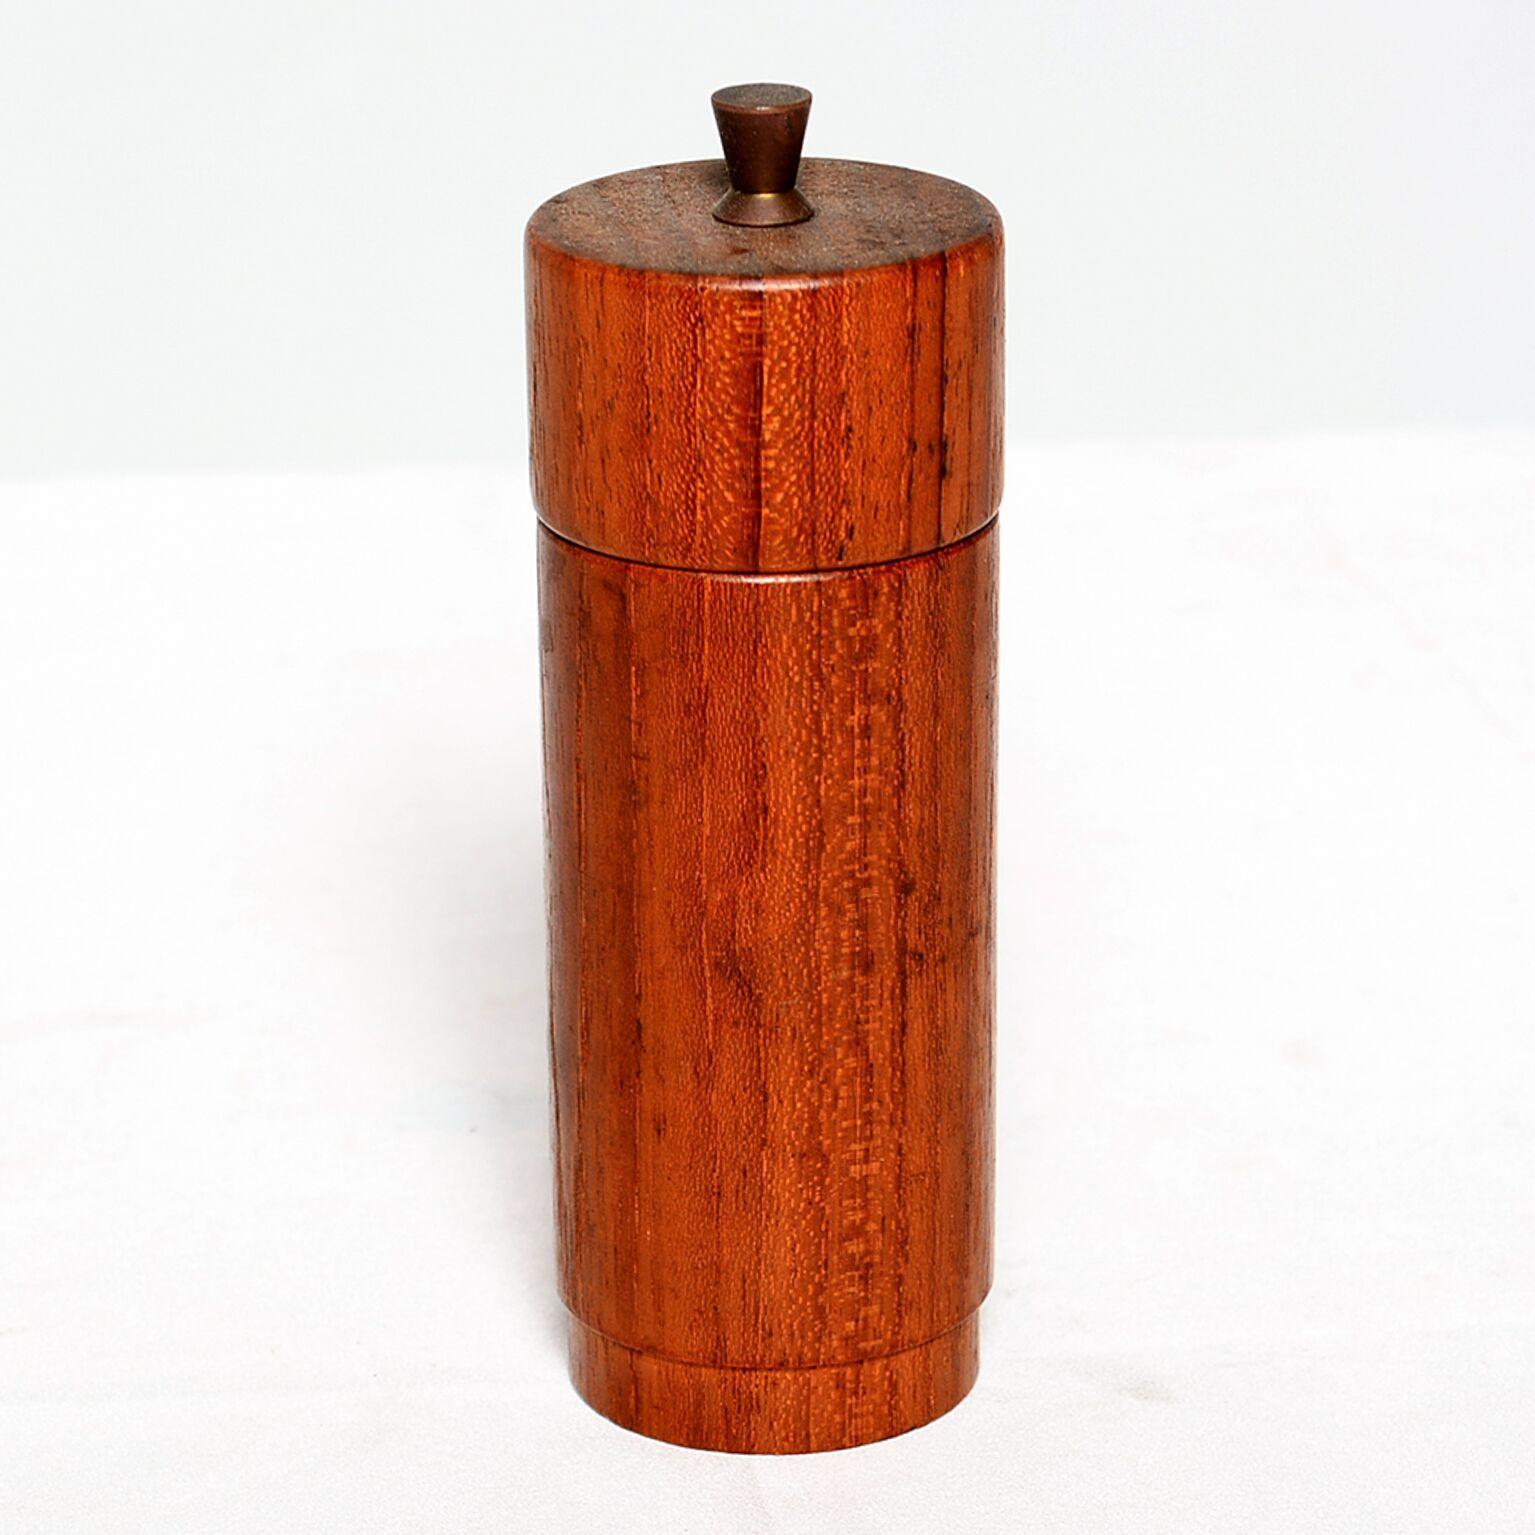 For your pleasure: Midcentury Danish vintage modern teak wood pepper mill grinder with brass accent.

Original unrestored vintage condition. See images please. 

Measures approx: diameter 2